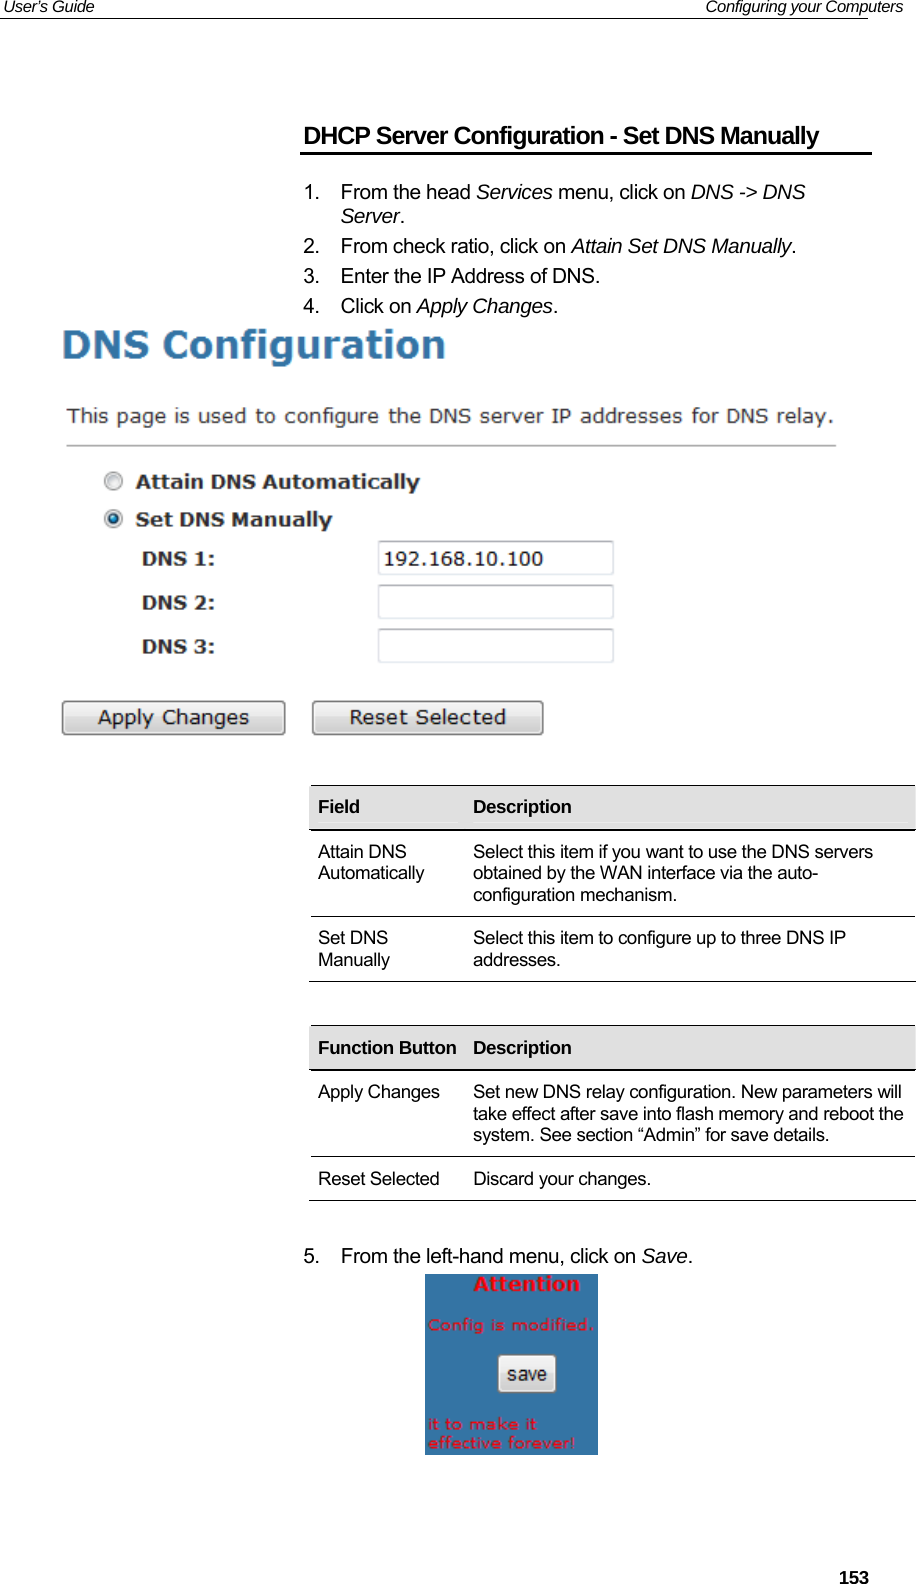 User’s Guide   Configuring your Computers  DHCP Server Configuration - Set DNS Manually 1. From the head Services menu, click on DNS -&gt; DNS Server. 2.  From check ratio, click on Attain Set DNS Manually. 3.  Enter the IP Address of DNS. 4. Click on Apply Changes.     Field  Description Attain DNS Automatically Select this item if you want to use the DNS servers obtained by the WAN interface via the auto-configuration mechanism. Set DNS Manually Select this item to configure up to three DNS IP addresses.         Function Button Description    Apply Changes  Set new DNS relay configuration. New parameters will take effect after save into flash memory and reboot the system. See section “Admin” for save details. Reset Selected  Discard your changes.  5.  From the left-hand menu, click on Save.     153